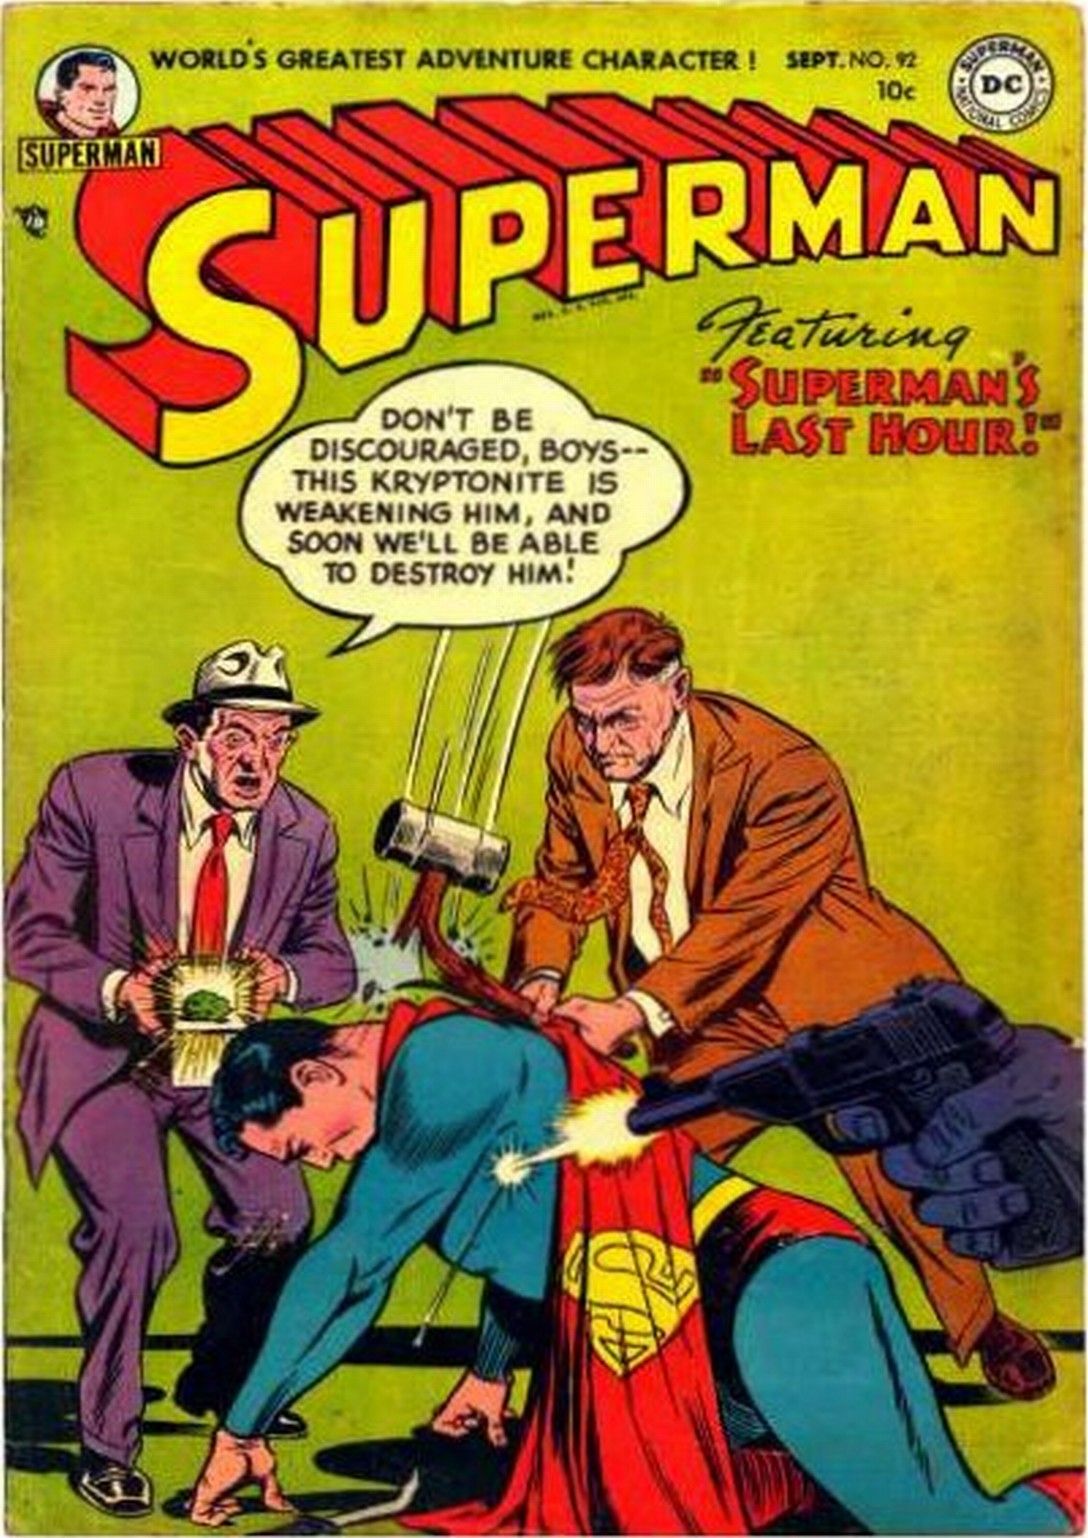 Superman is attacked by gangsters